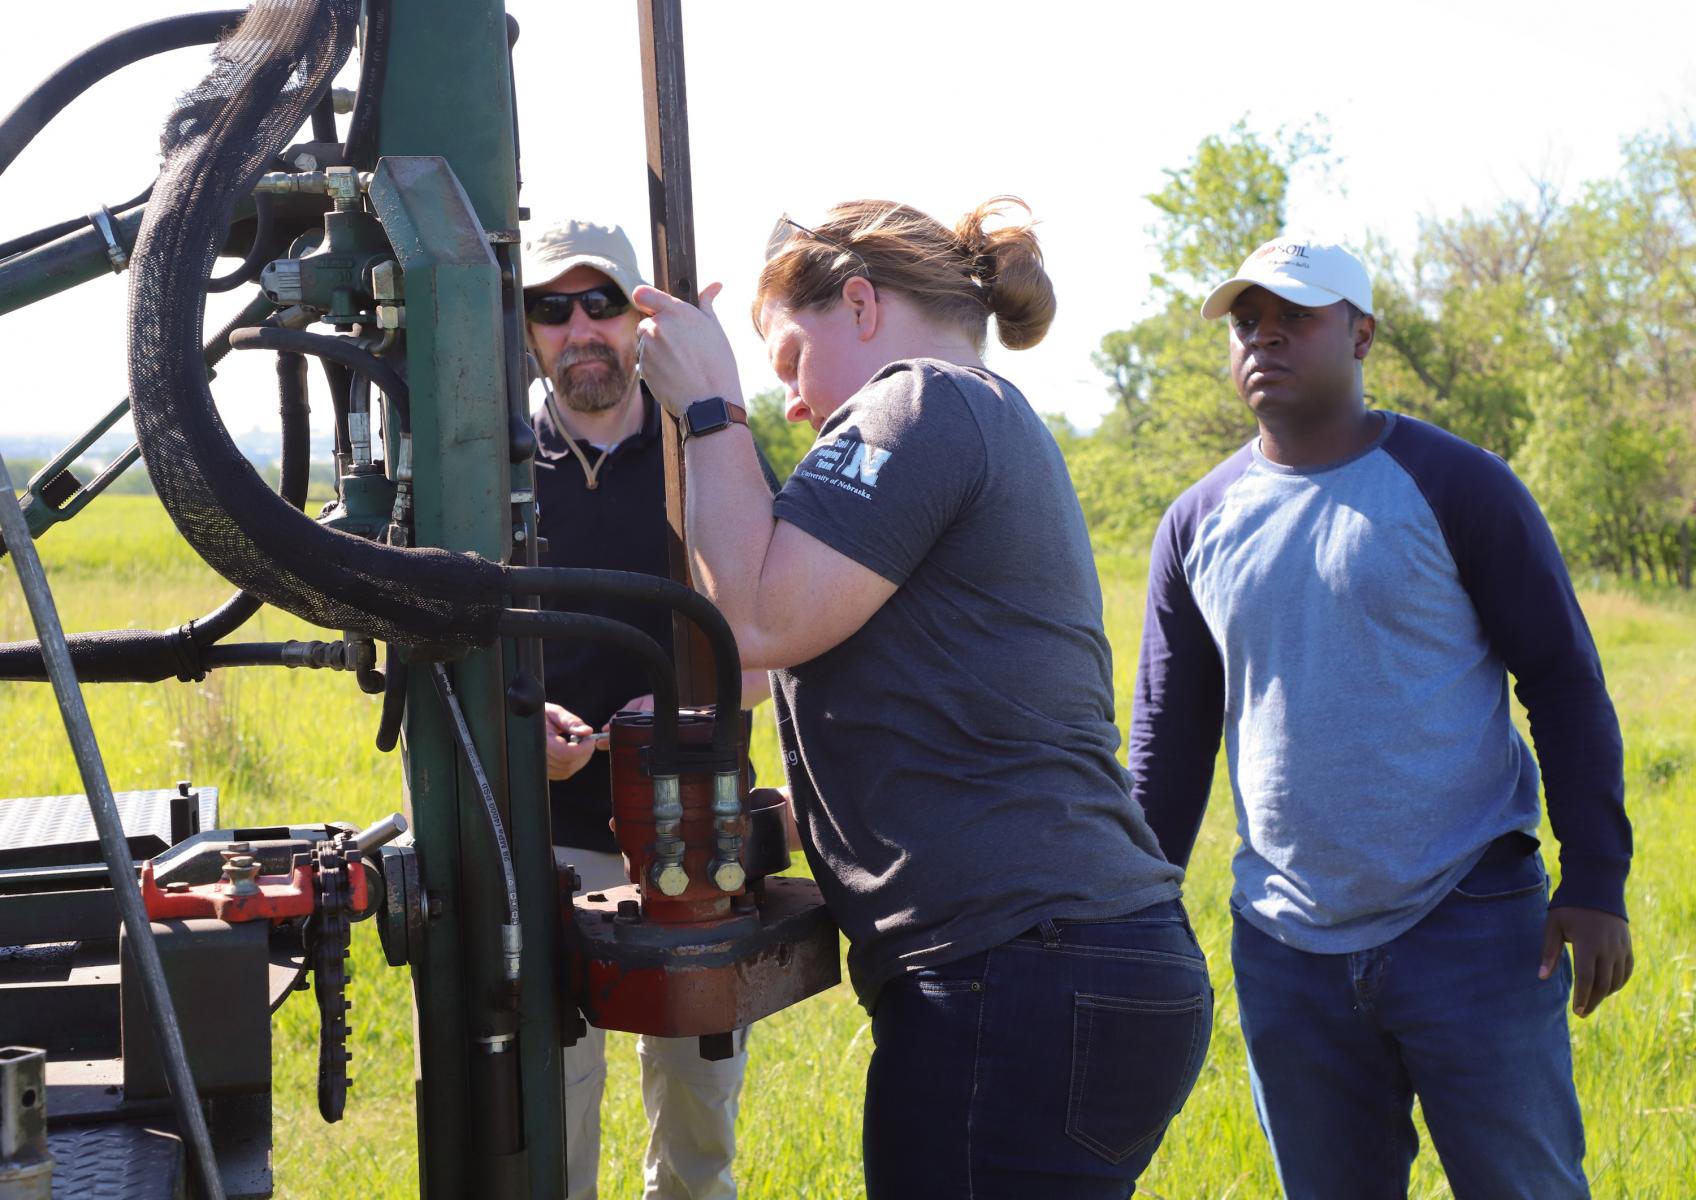 Rebecca Young, Department of Agronomy and Horticulture assistant professor of practice, demonstrates for agronomy assistant professor Michael Kaiser, left, and Christopher Anuo, agronomy doctoral student, proper use of a truck-mounted hydraulic soil probe in collecting soil cores at Nine-Mile Prairie for use in Agronomy 153 Soil Resources classes.